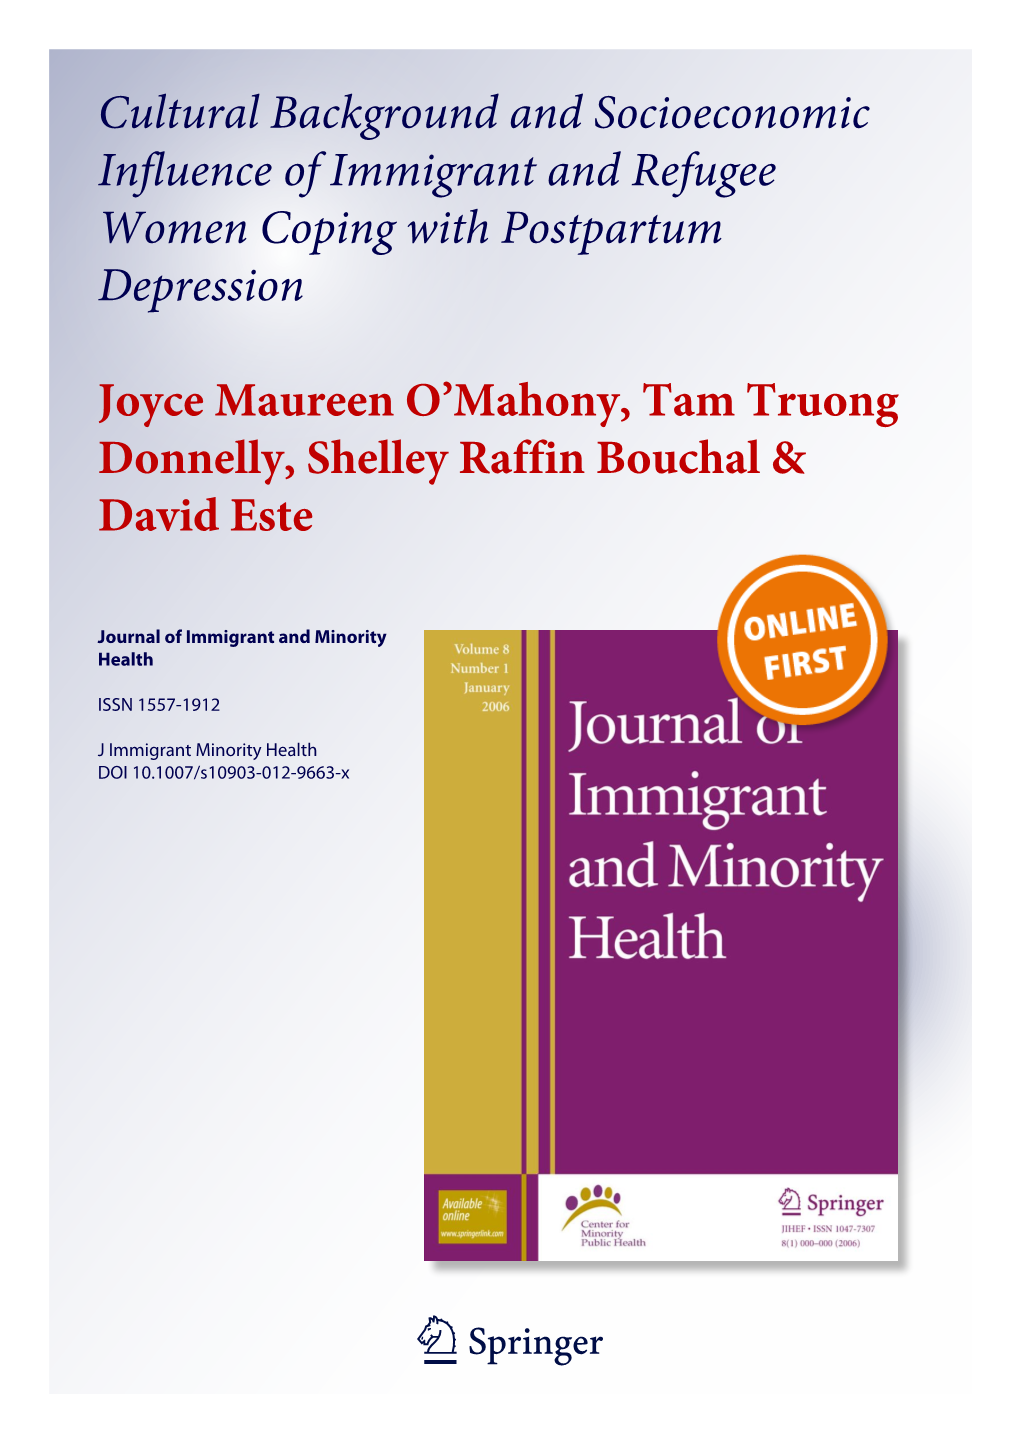 Cultural Background and Socioeconomic Influence of Immigrant and Refugee Women Coping with Postpartum Depression Joyce Maureen O